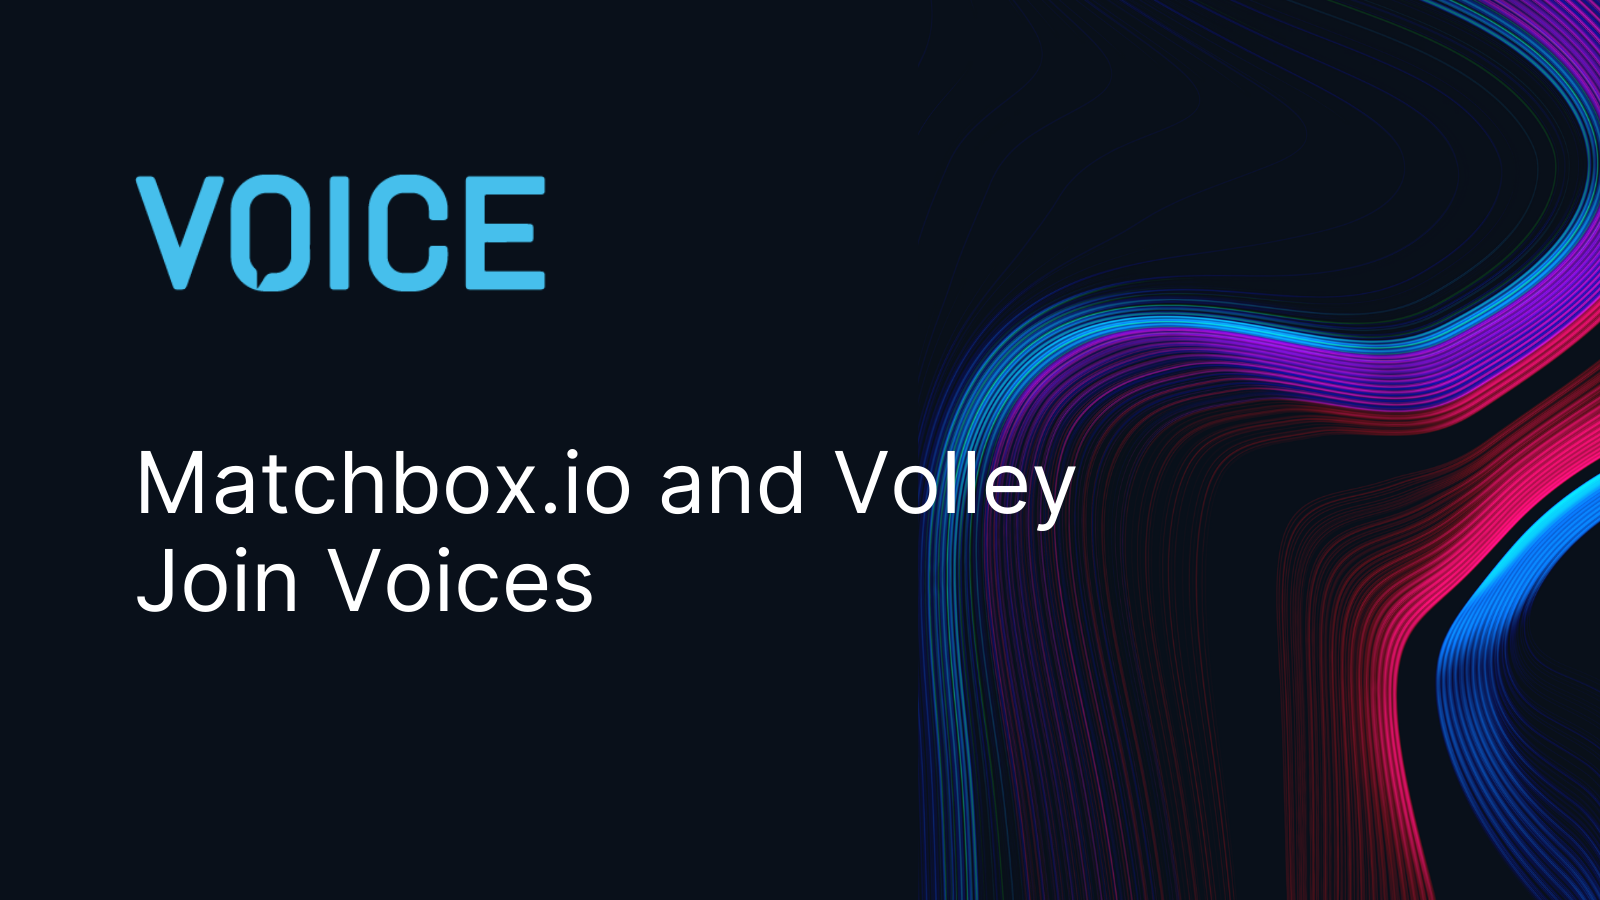 Matchbox.io and Volley Join Voices